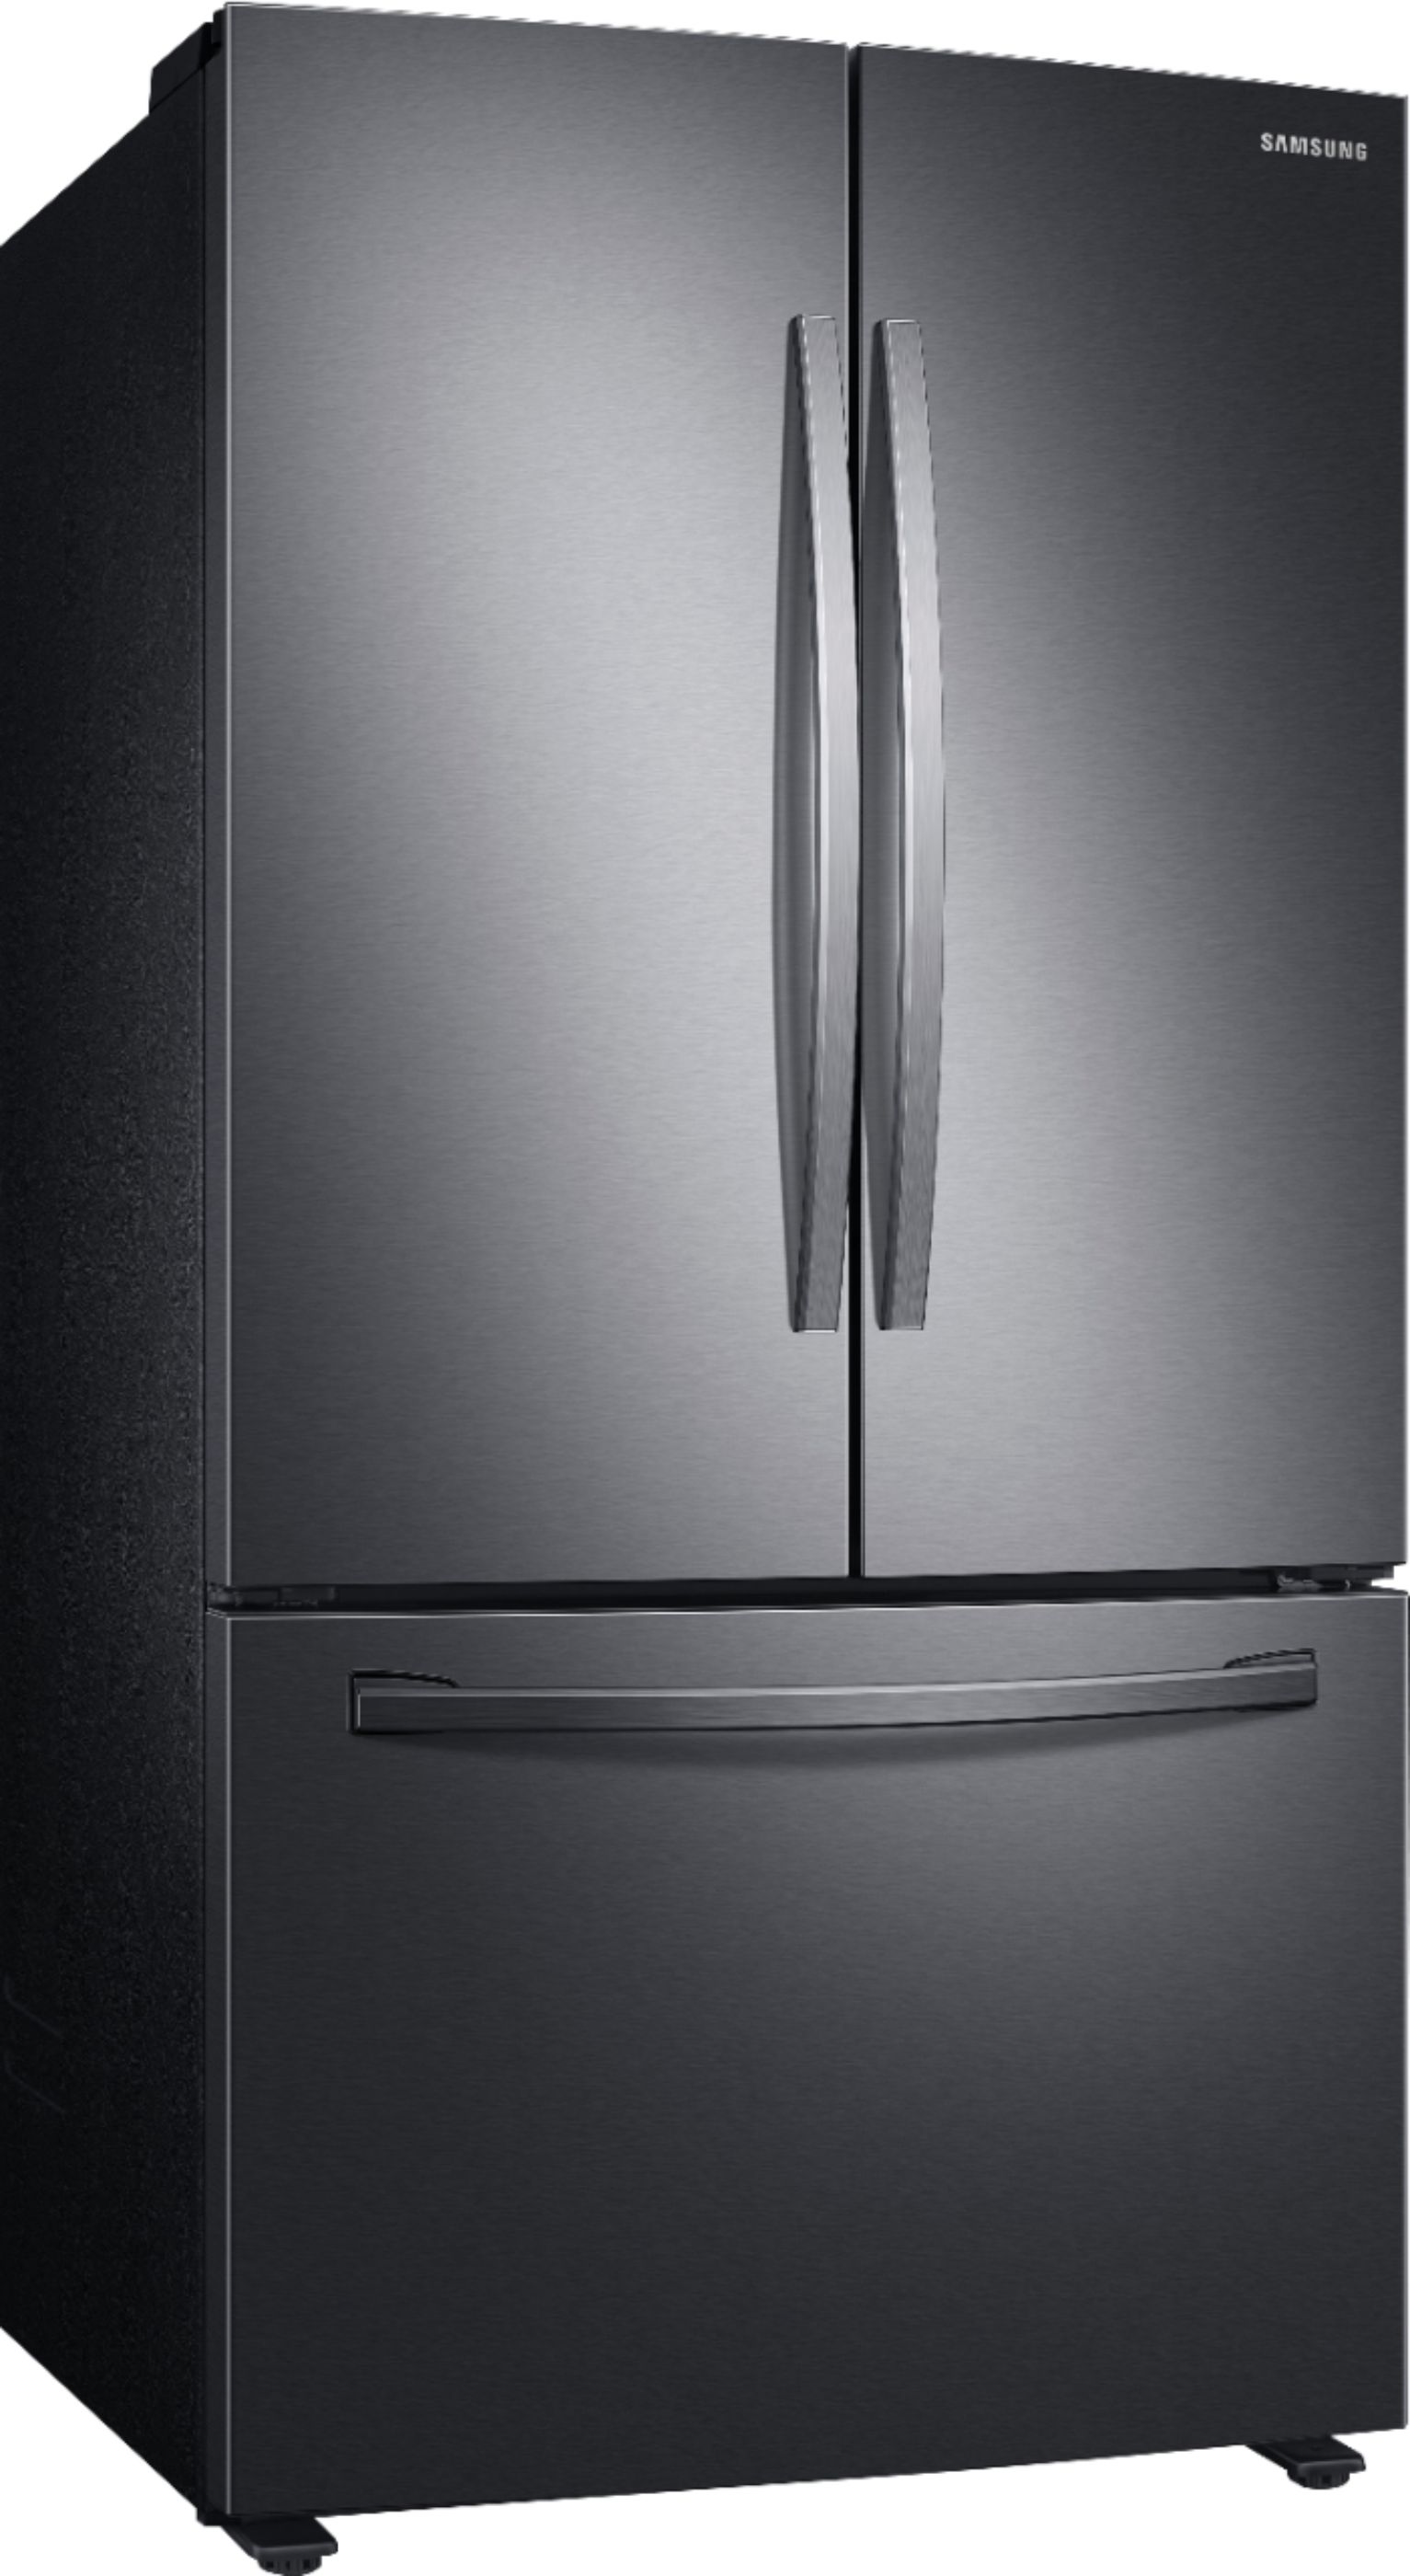 Angle View: Samsung - 28 cu. ft. 3-Door French Door Refrigerator with Large Capacity - Black Stainless Steel